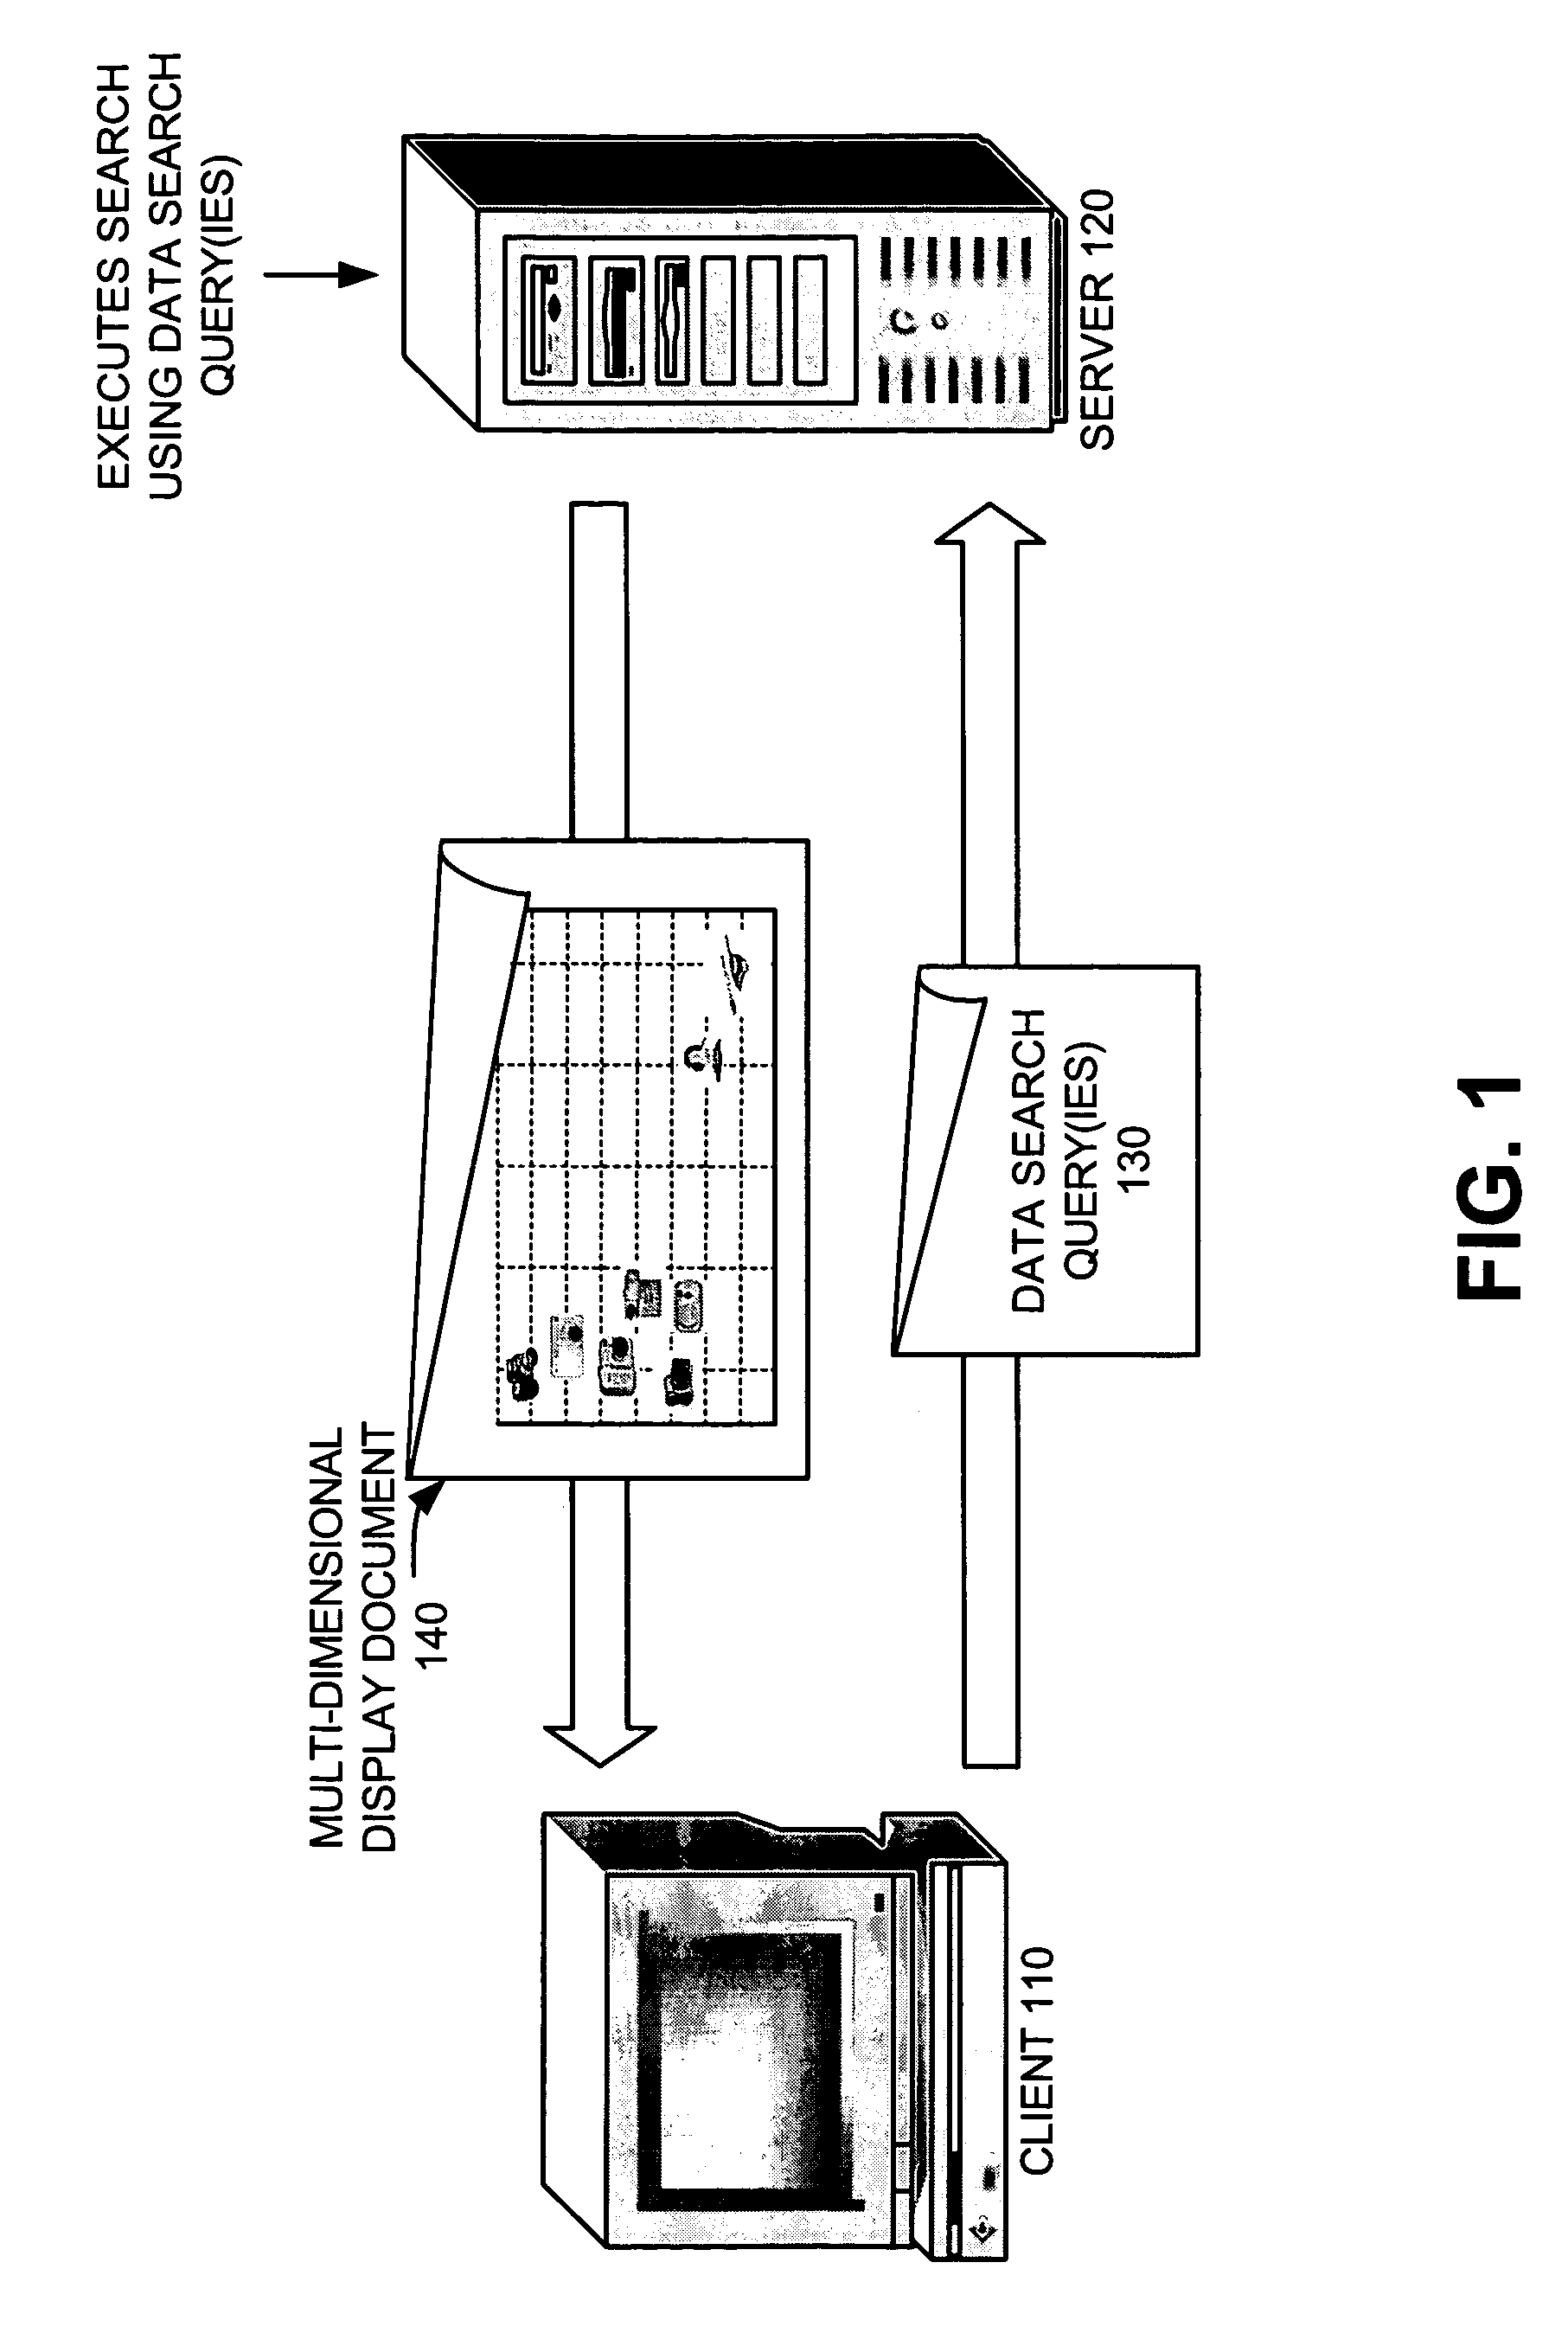 Systems and methods for sorting and displaying search results in multiple dimensions